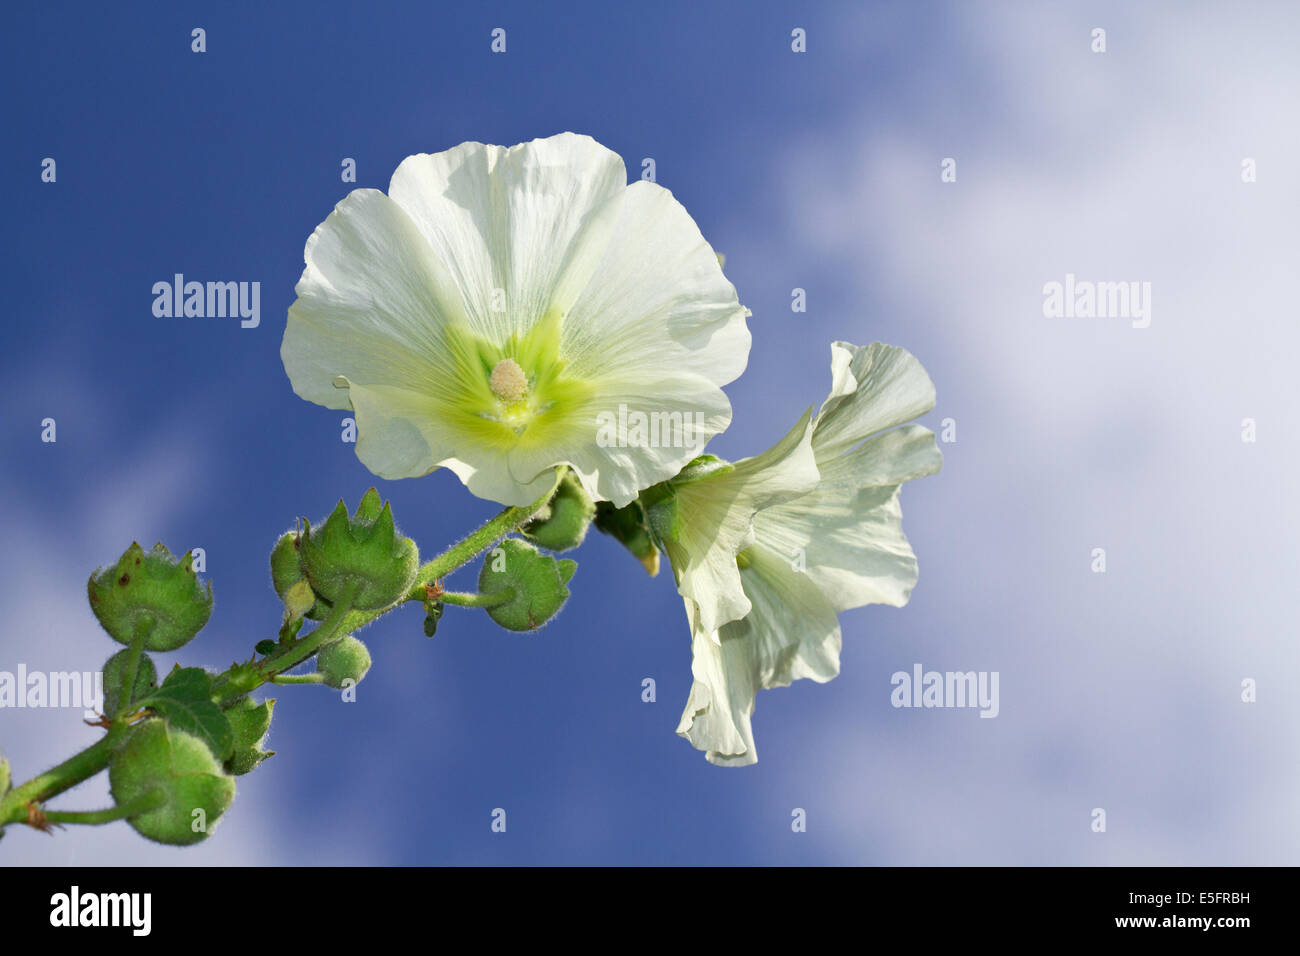 White Hollyhock against a blue sky with white clouds Stock Photo